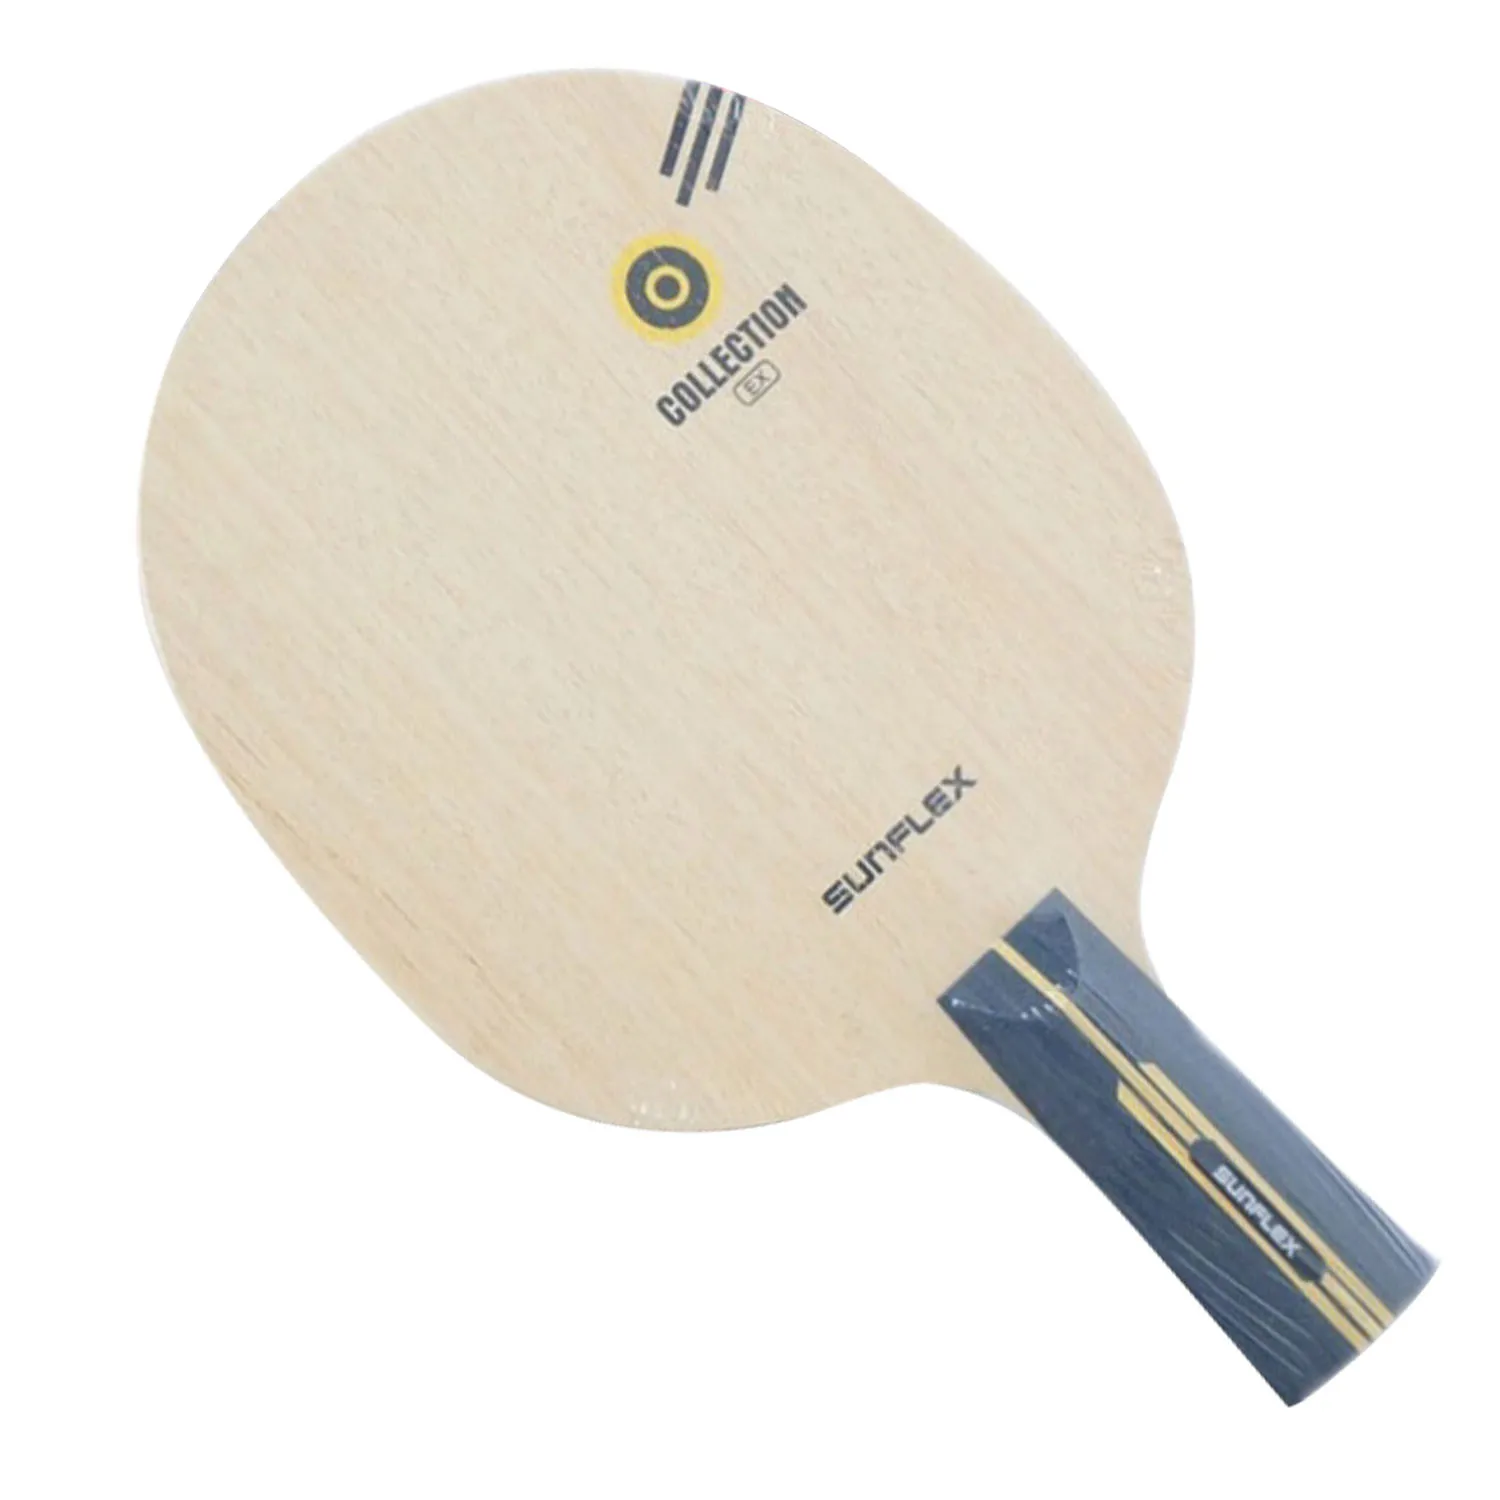 

SUNFLEX official COLLECTION EX 2 generation table tennis blade 5 wood fast attack player ping pong Blade Racket